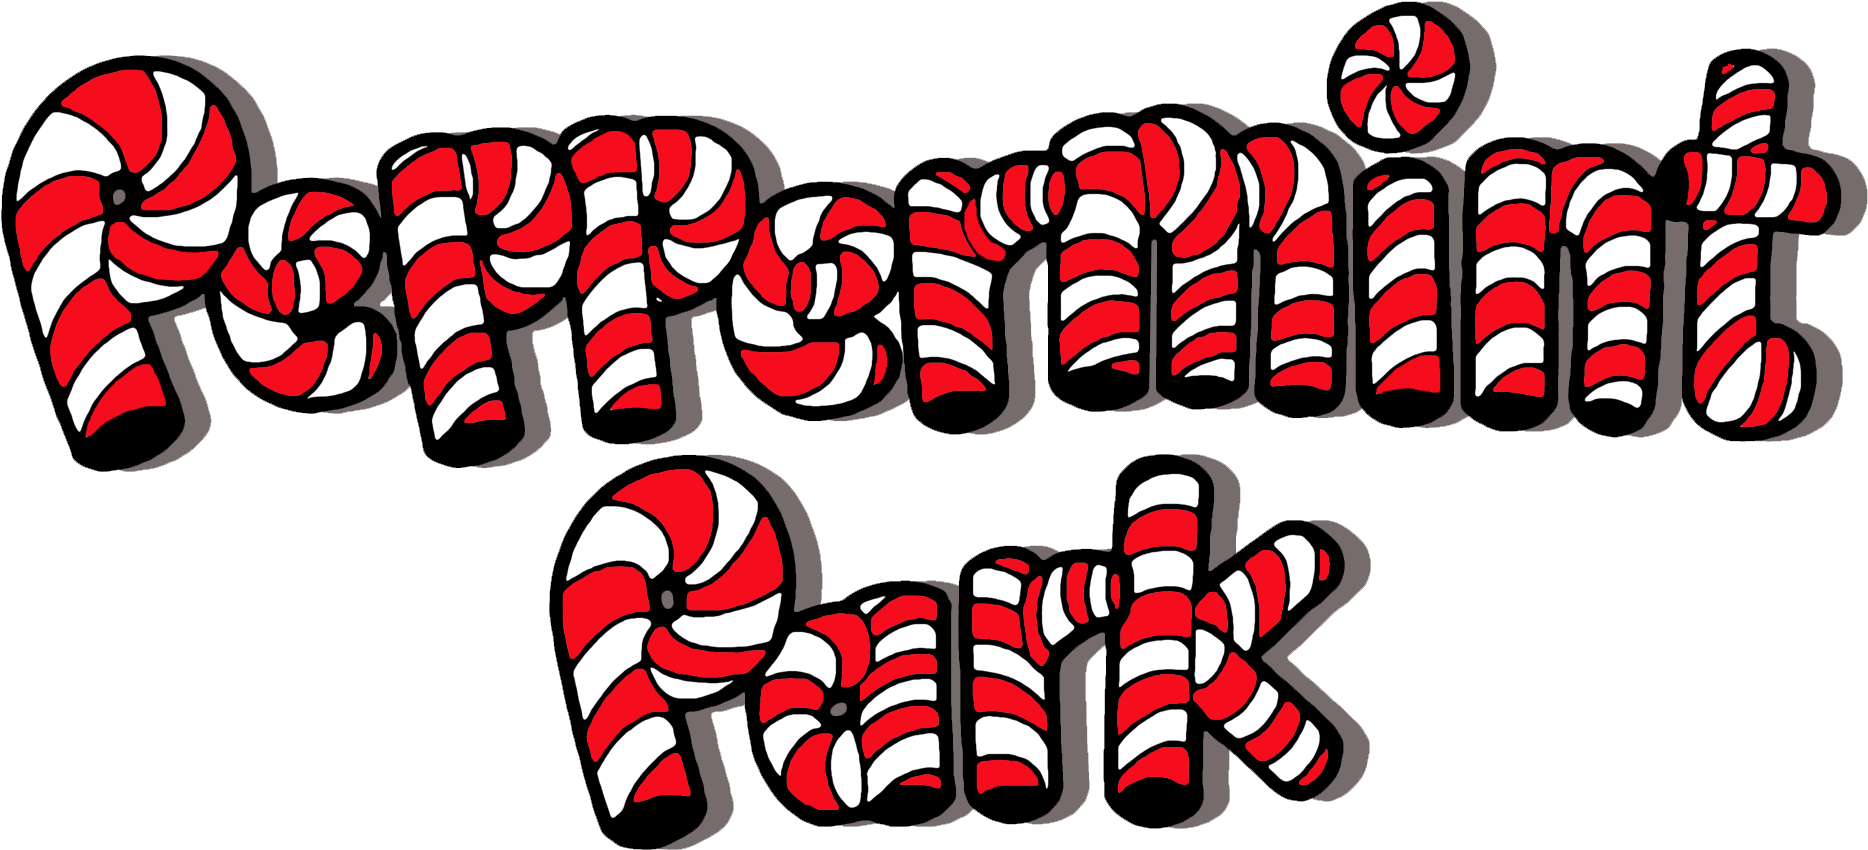 Peppermint Candy Text Illustration PNG